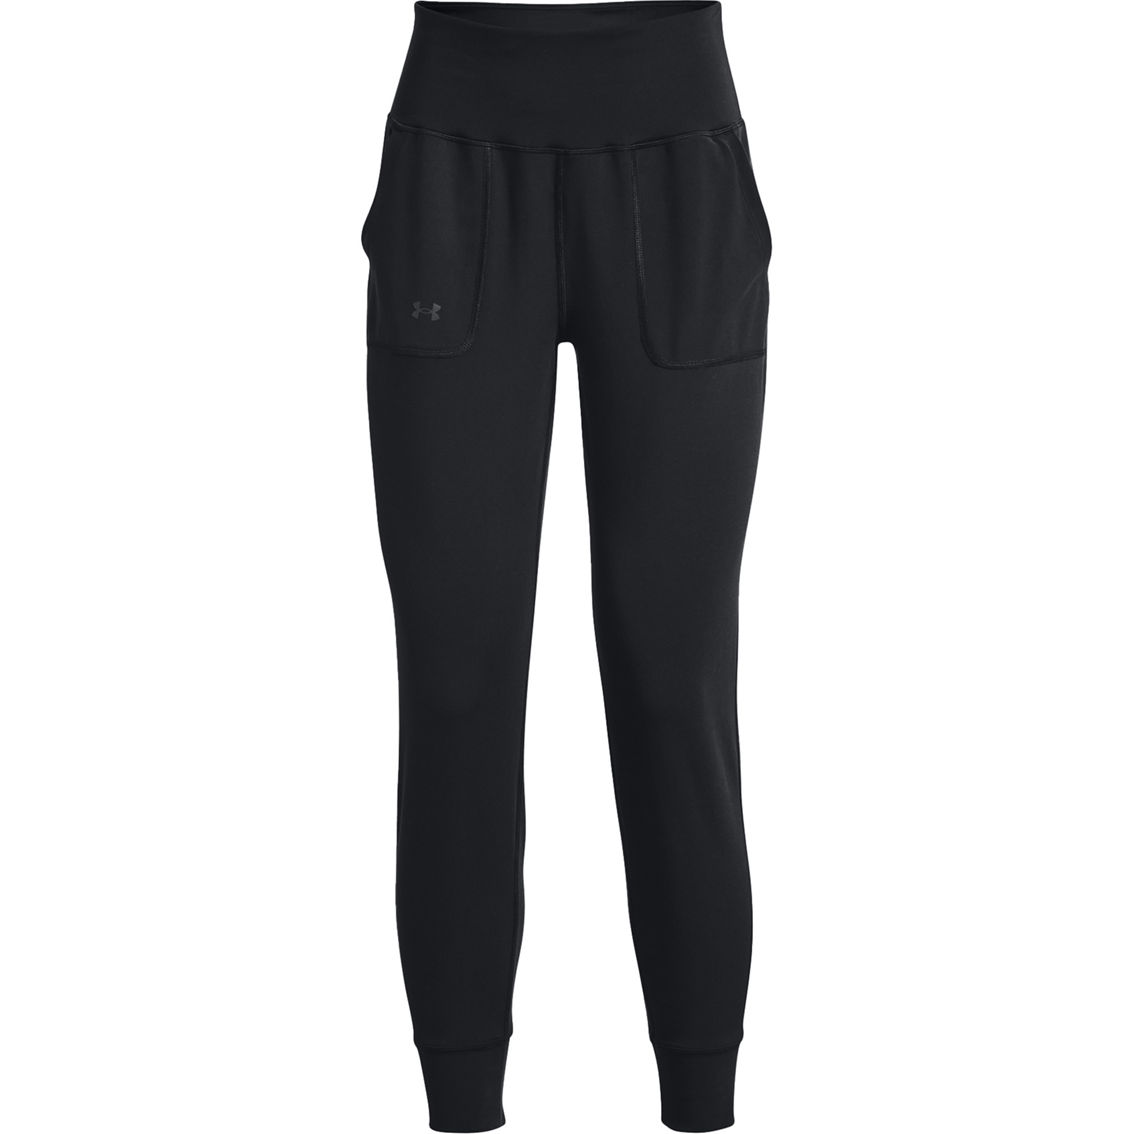 Under Armour UA Motion Jogger Pants - Image 3 of 6